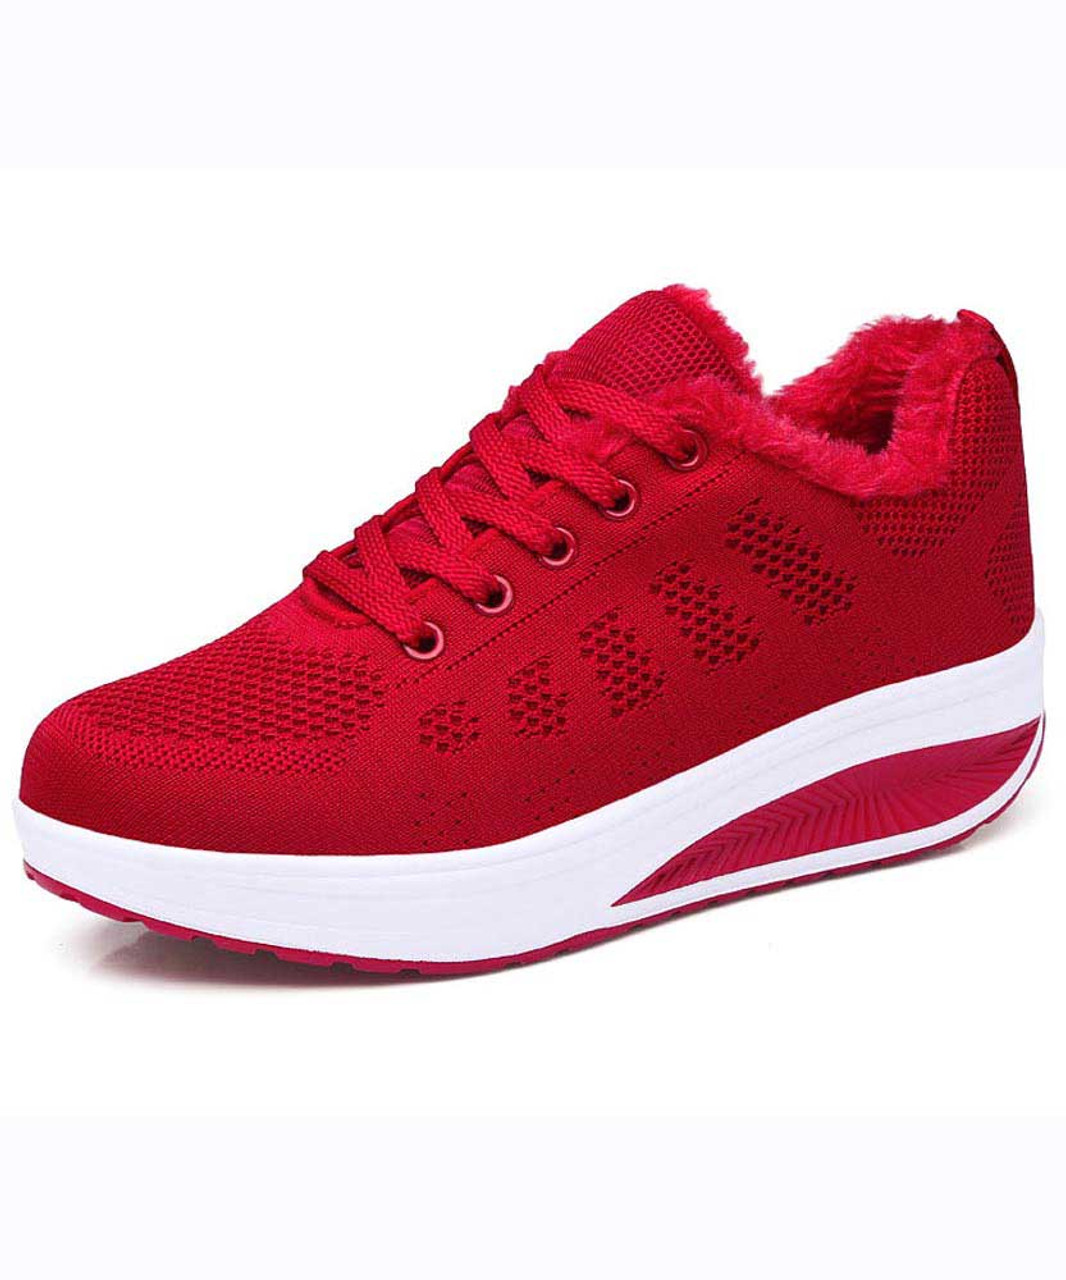 All-Red Air Maxes Are Now Here | Red air max, Air max sneakers, All red air  max